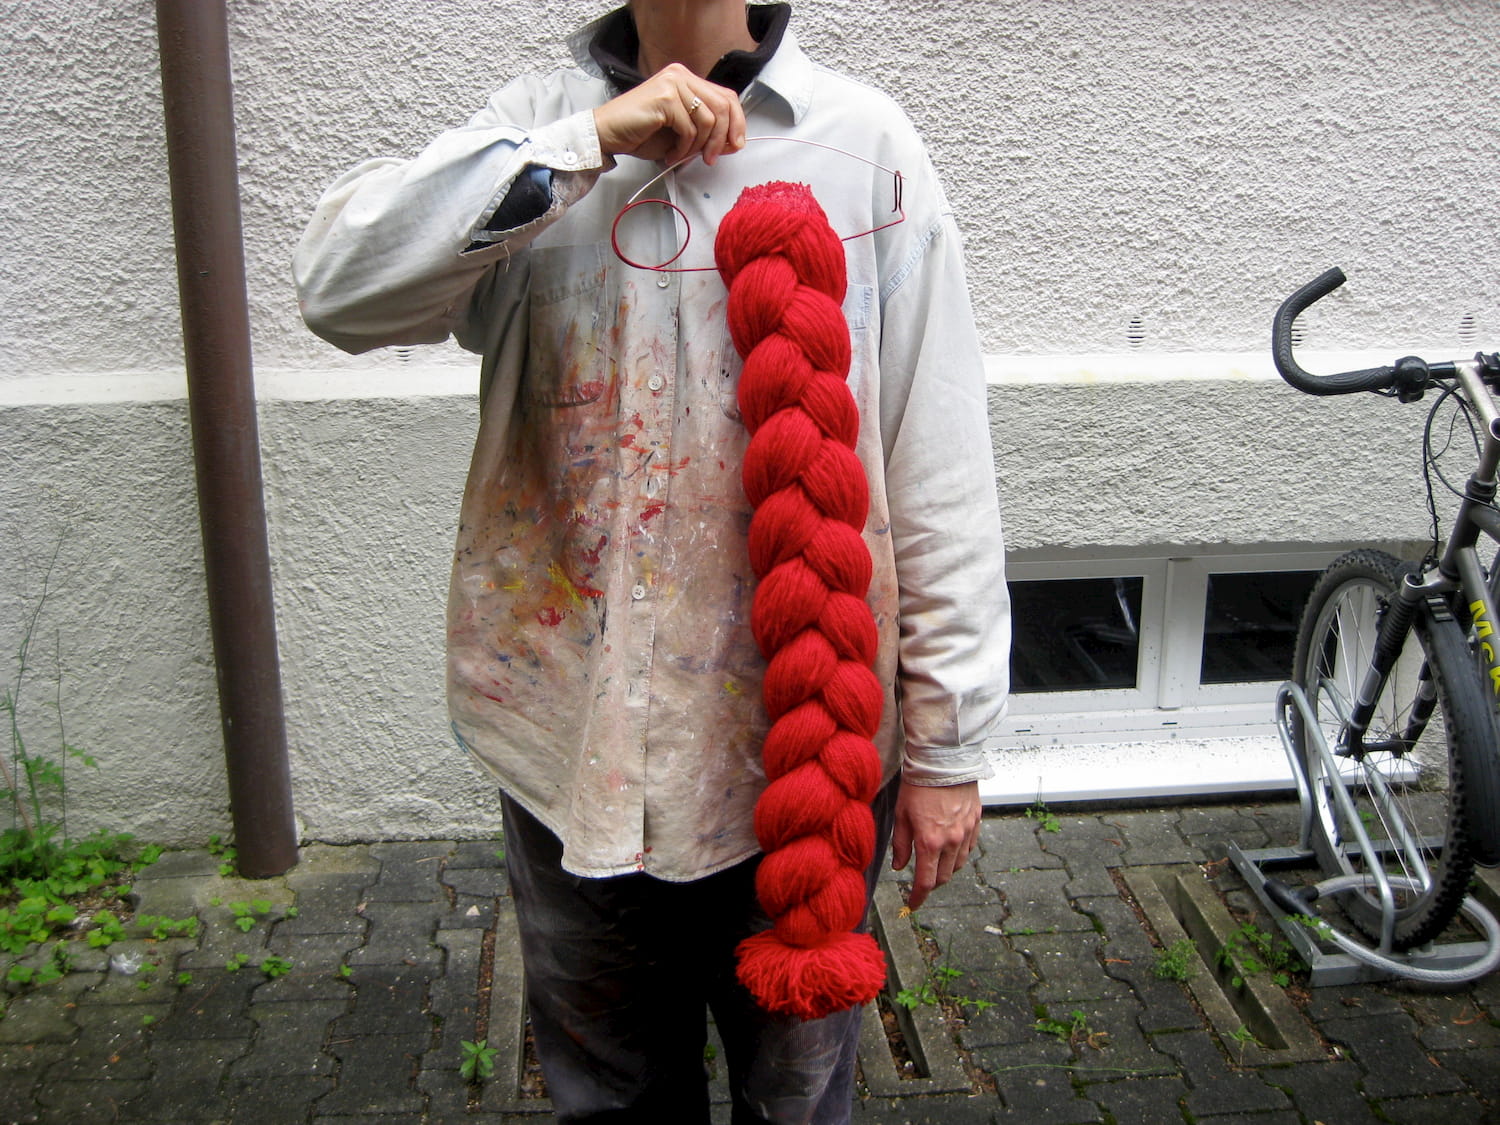 A photo of a person wearing a paint-spattered white shirt, holding a thick, long, red wool braid